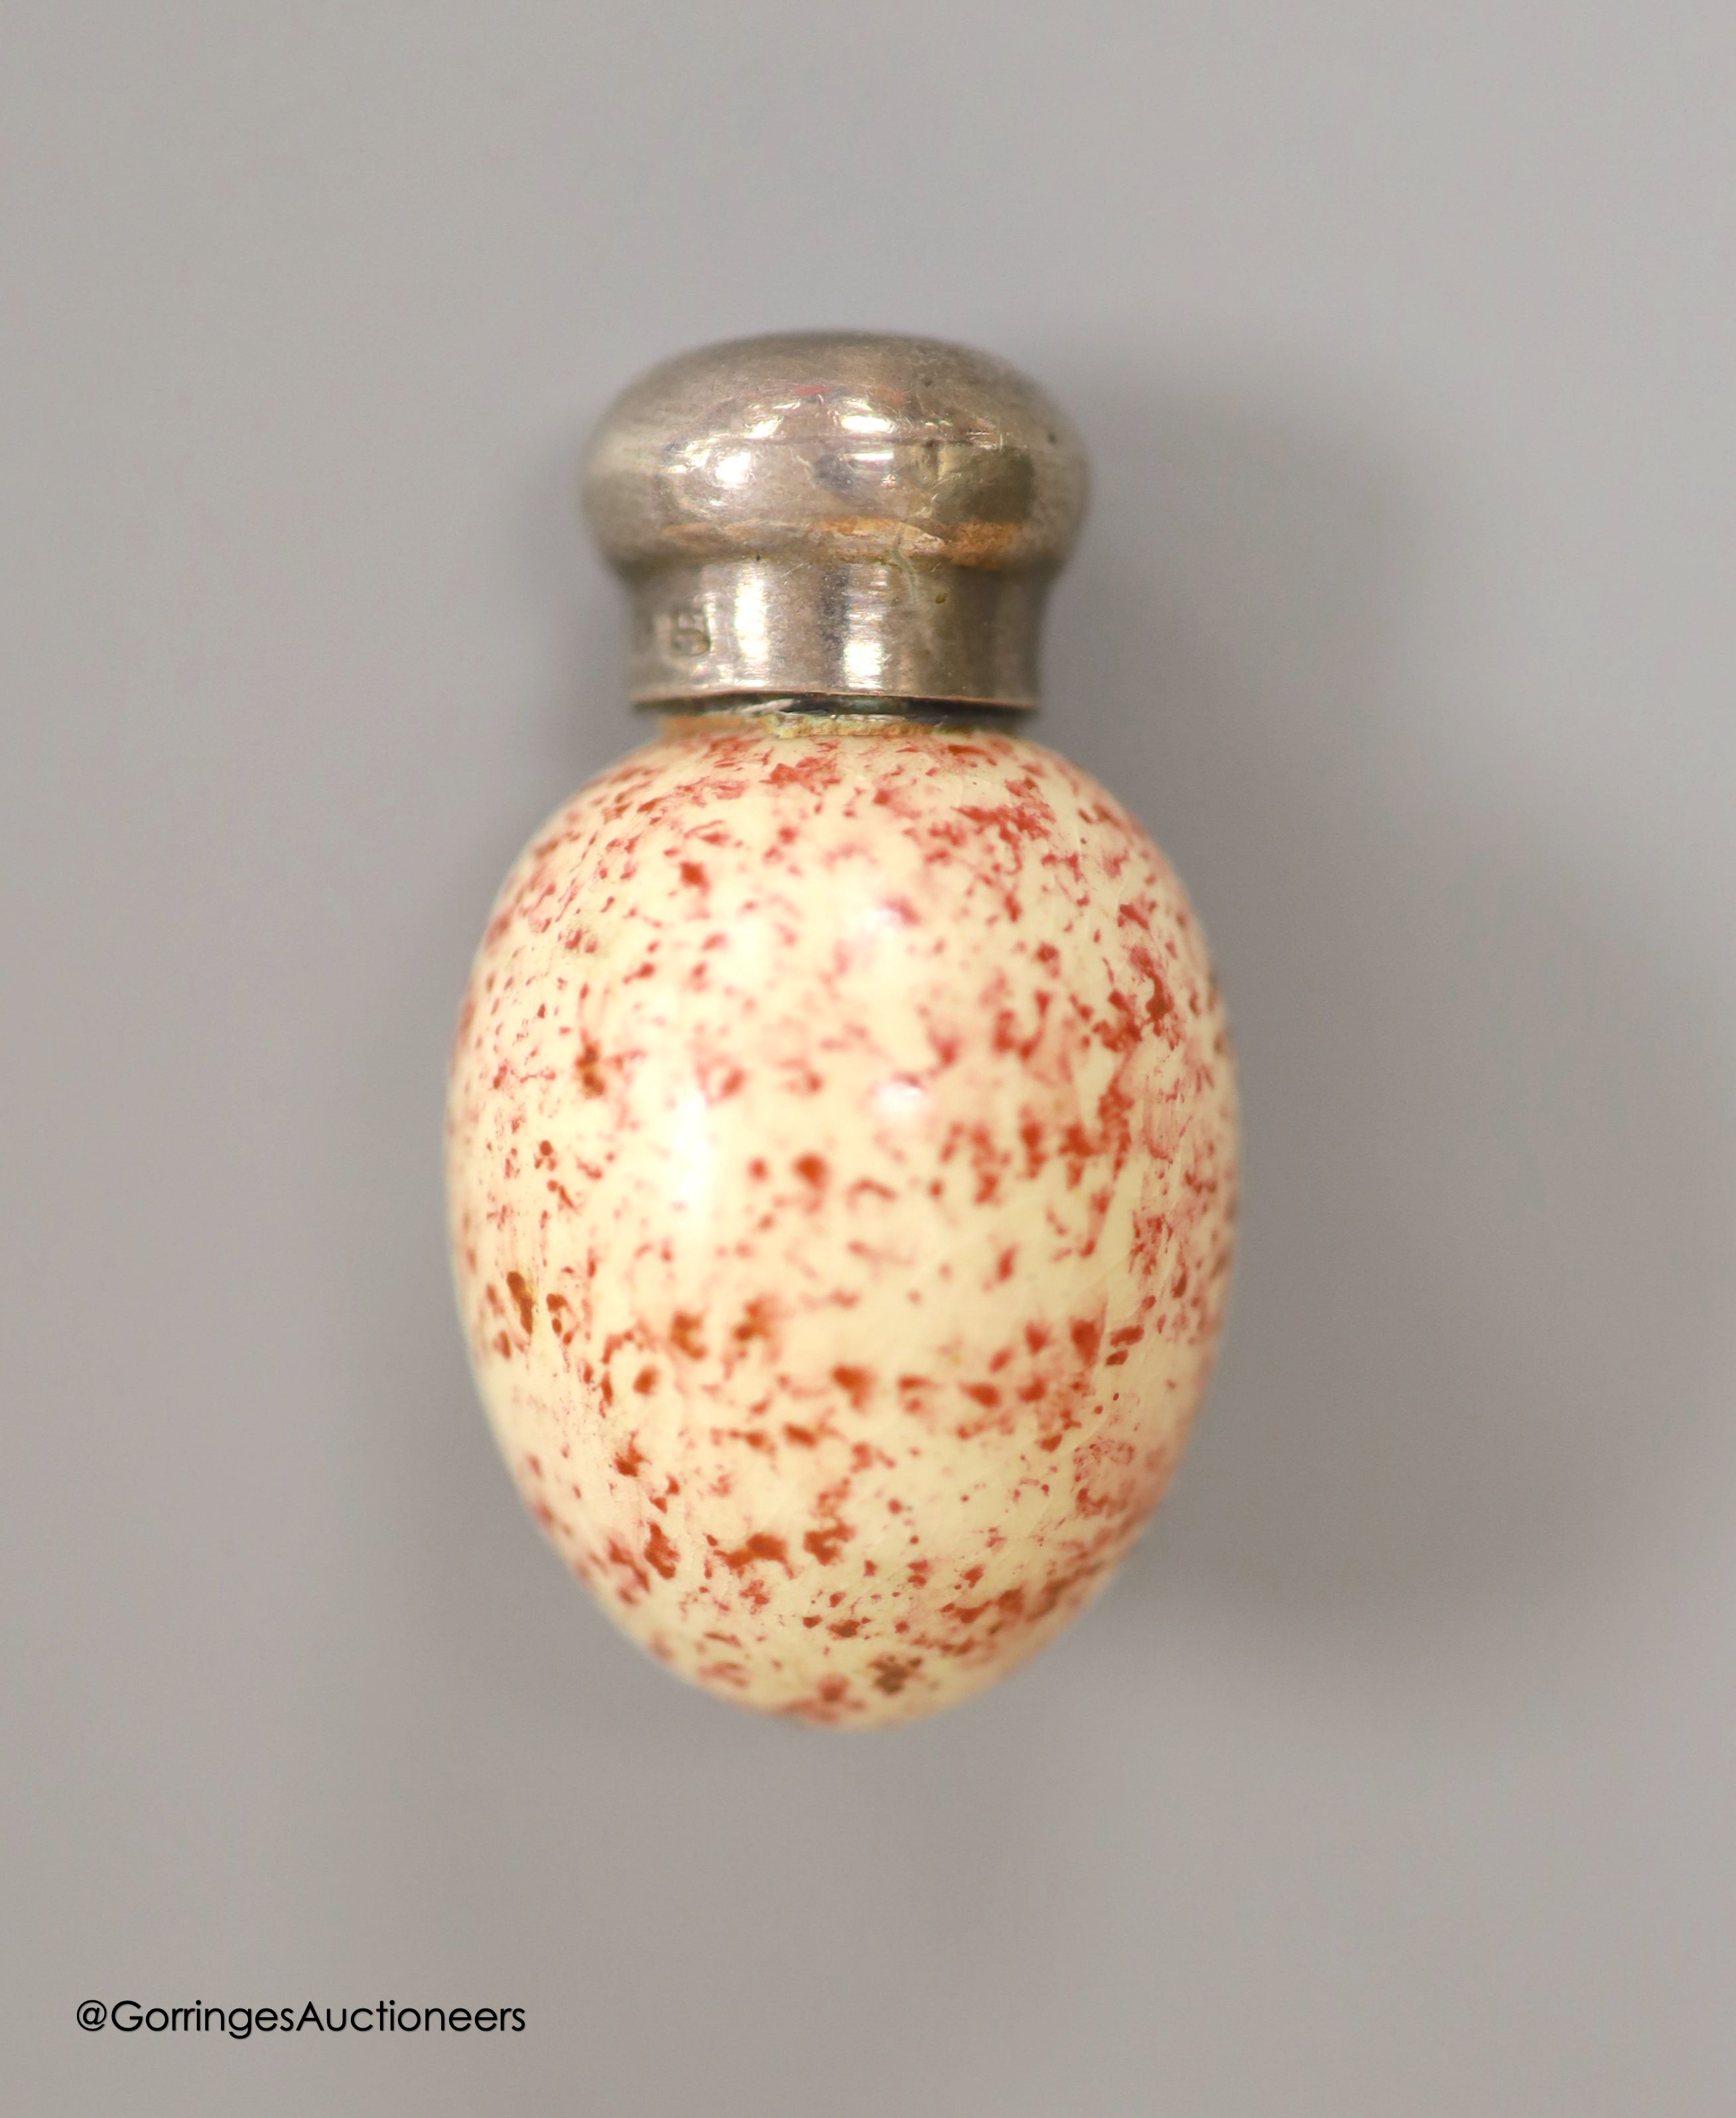 A late 19th/early 20th century silver mounted Macintyre? porcelain egg shaped scent flask, by Saunders & Shepherd, Birmingham, (indistinct date letter), 37mm.